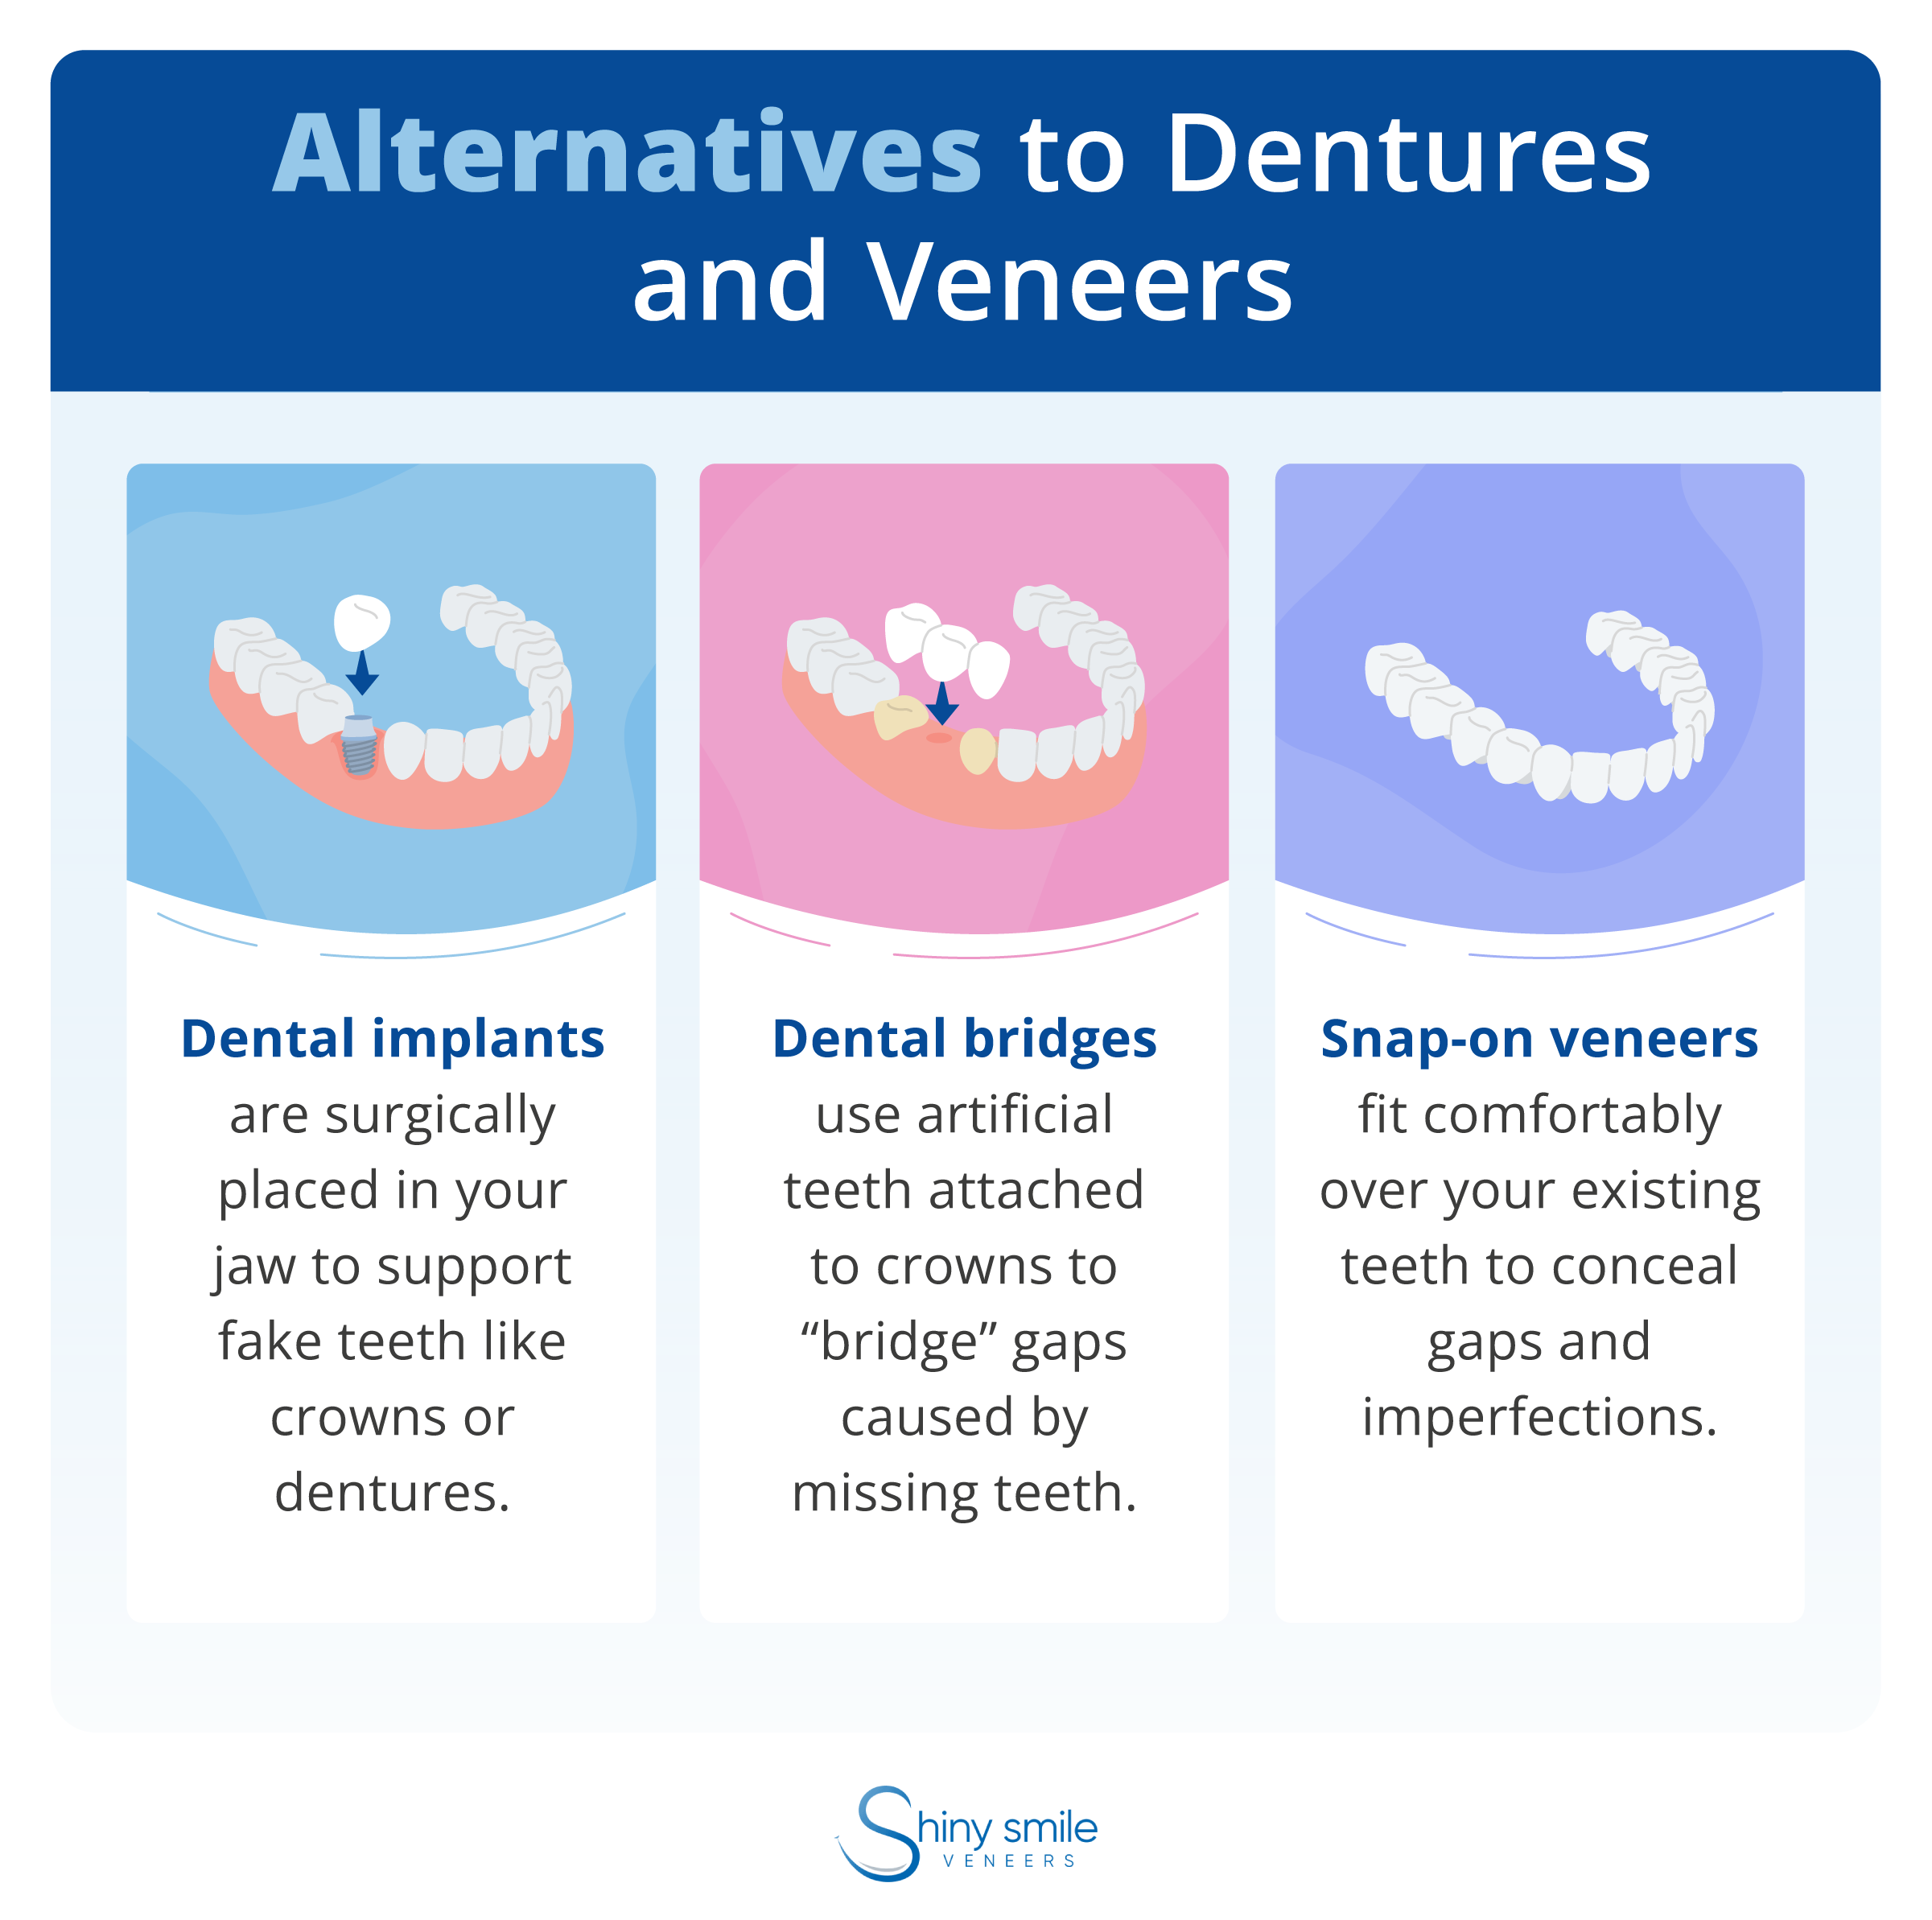 A list of alternatives to veneers and dentures 